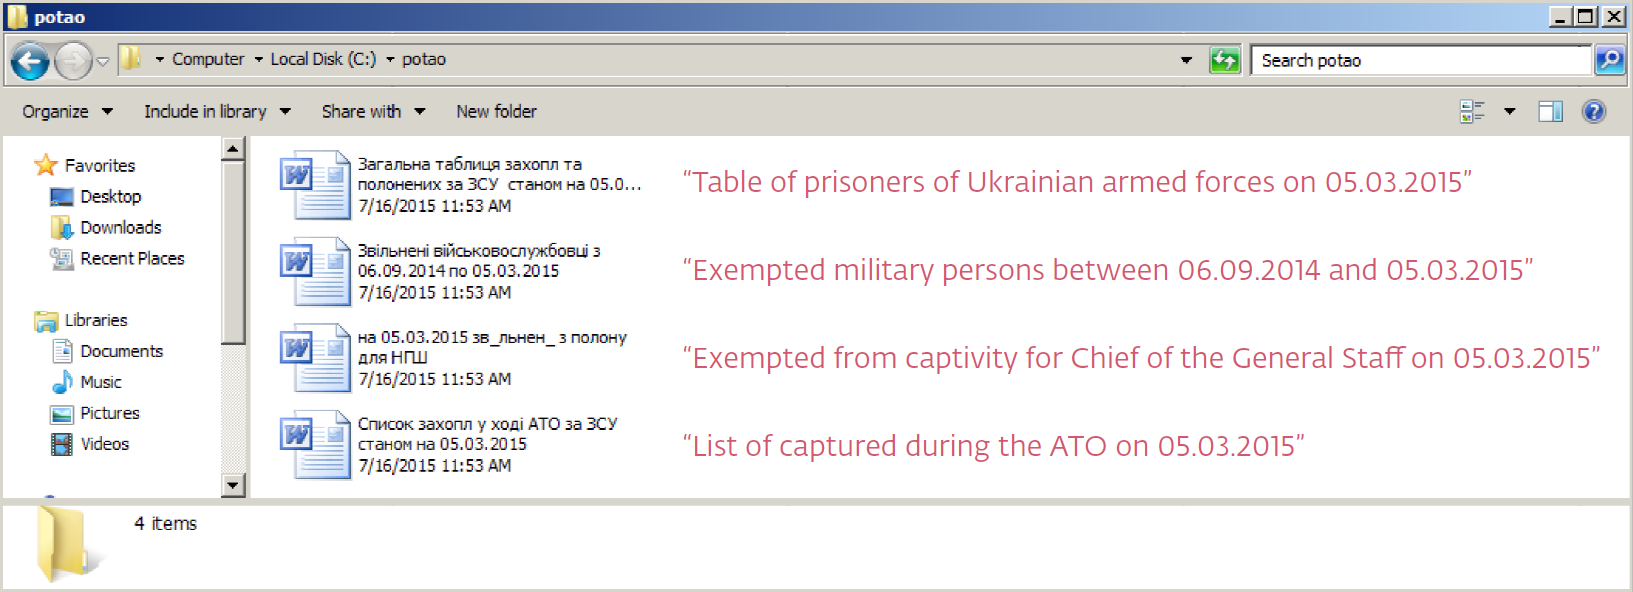 Figure 3 – Potao droppers with MS Word icons and file names used in attacks against high-value Ukrainian targets to capture the interest of recipients